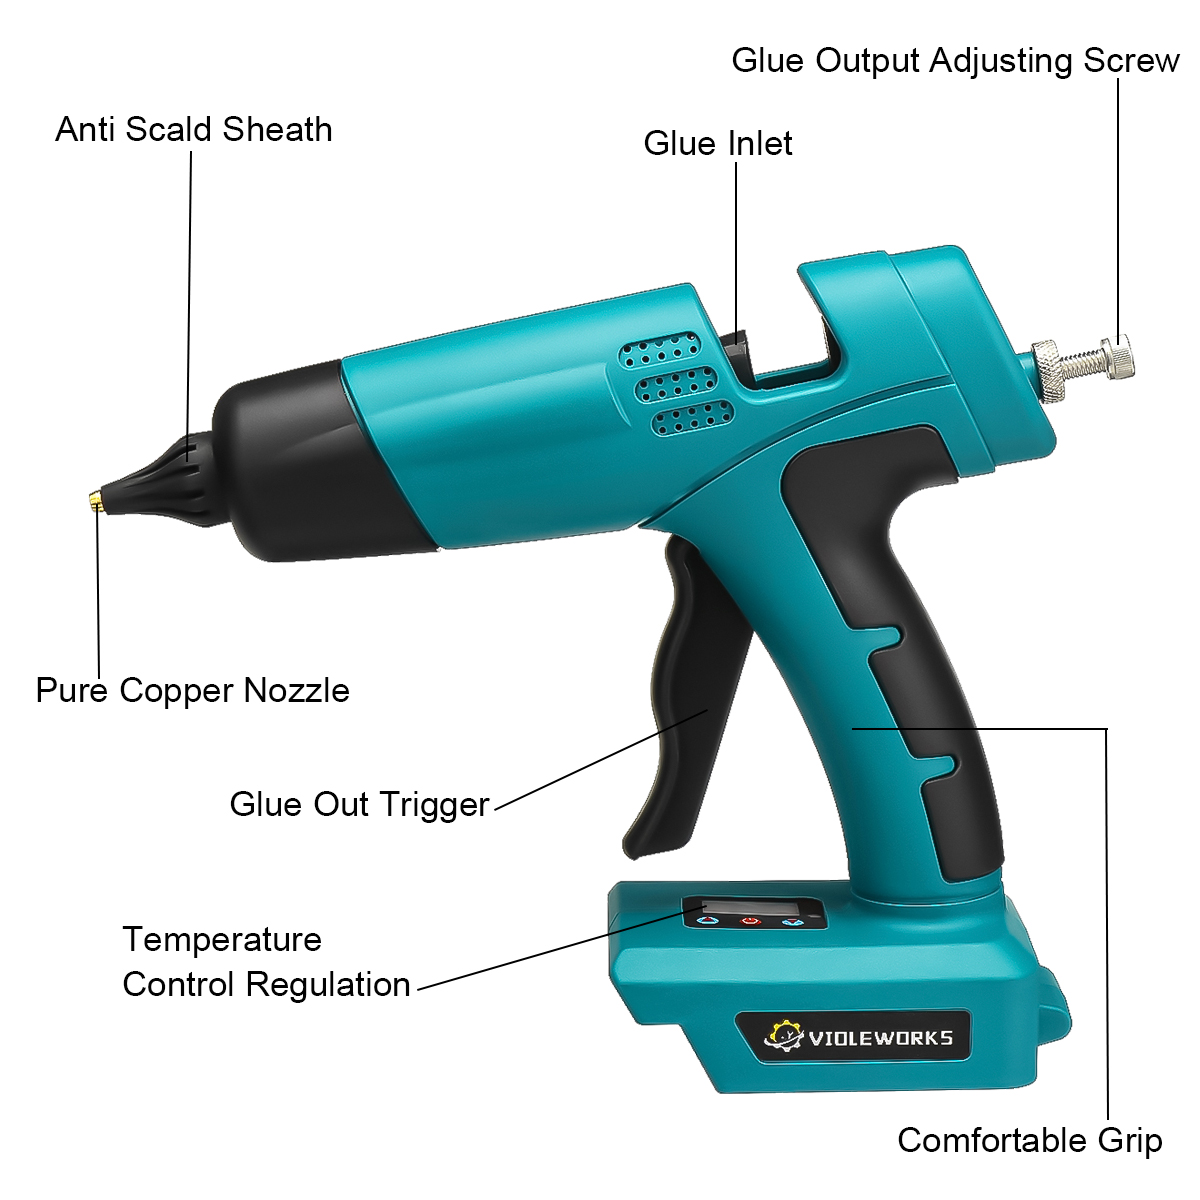 VIOLEWORKS-1200W-Glue-Guns-Cordless-Rechargeable-Hot-Glue-Applicator-Home-Improvement-Craft-DIY-for--1956103-11